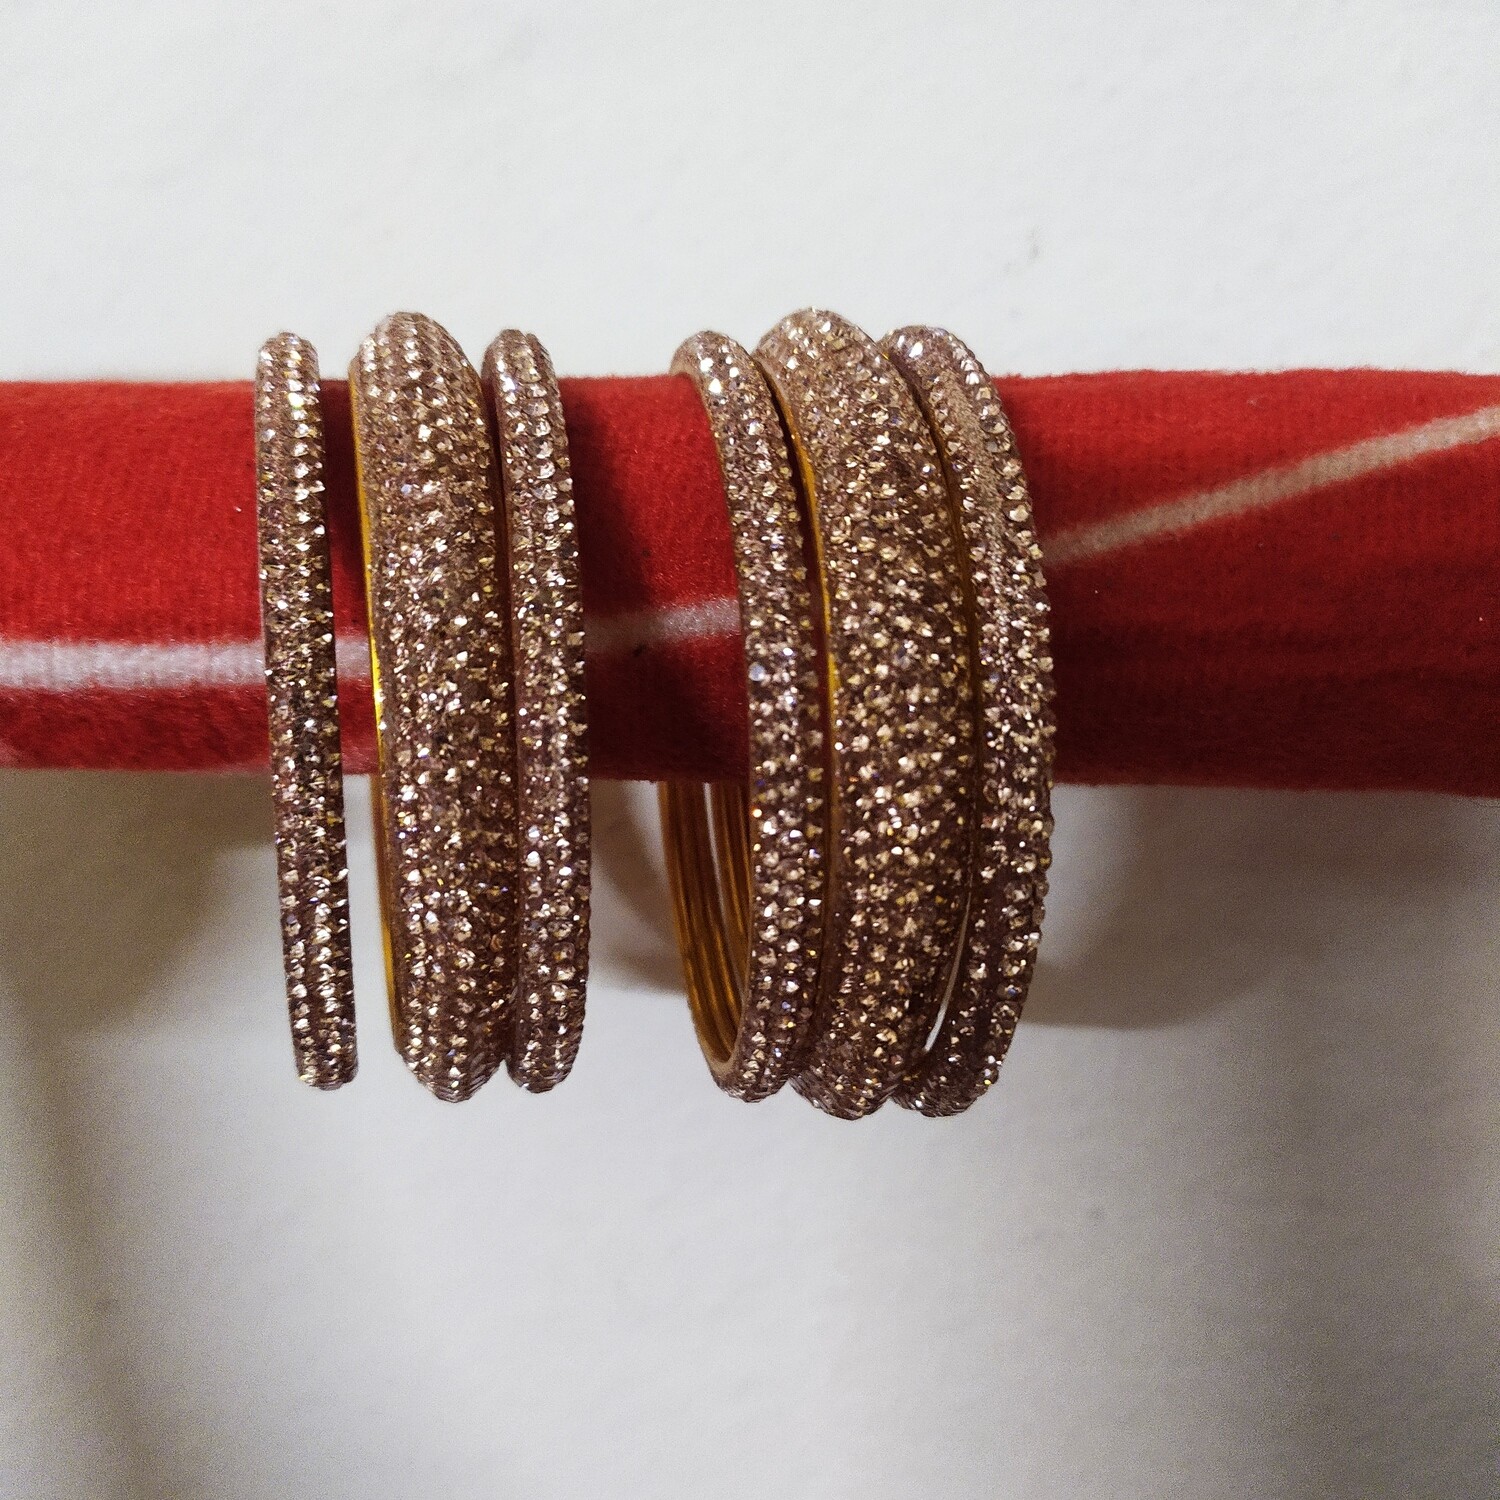 Gold bangles with white stones size 2-2